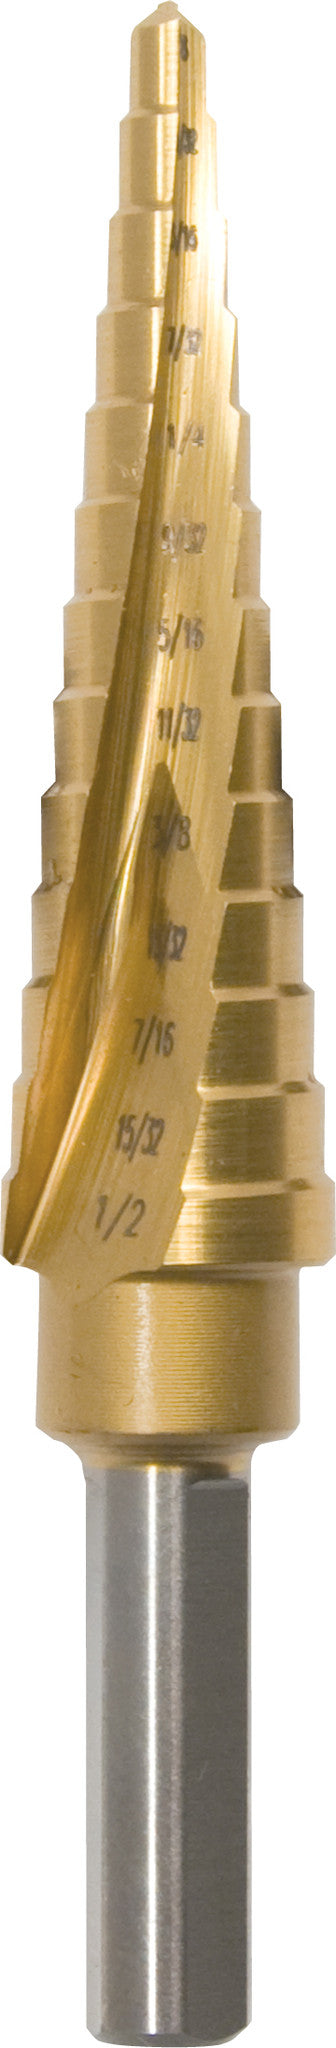 Hougen 35200 STEP DRILL 1/8 - 1/2"